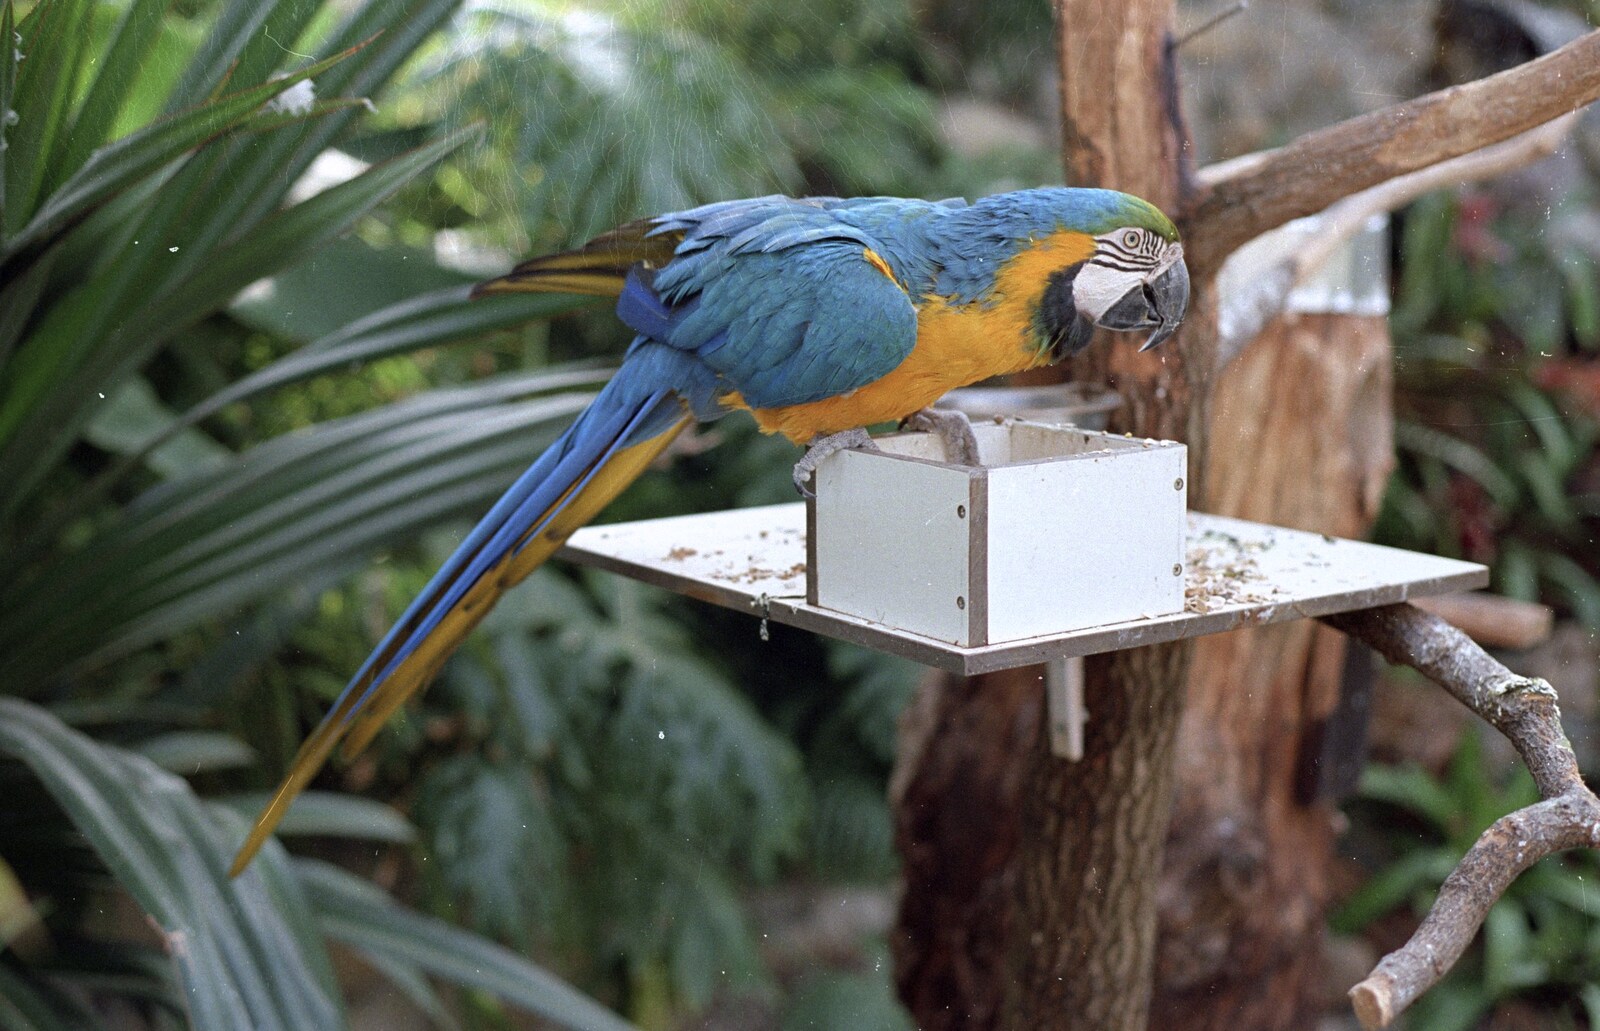 A Trip to Center Parcs, Eemhof, Netherlands - 24th March 1992: A brightly-coloured parrot or macaw